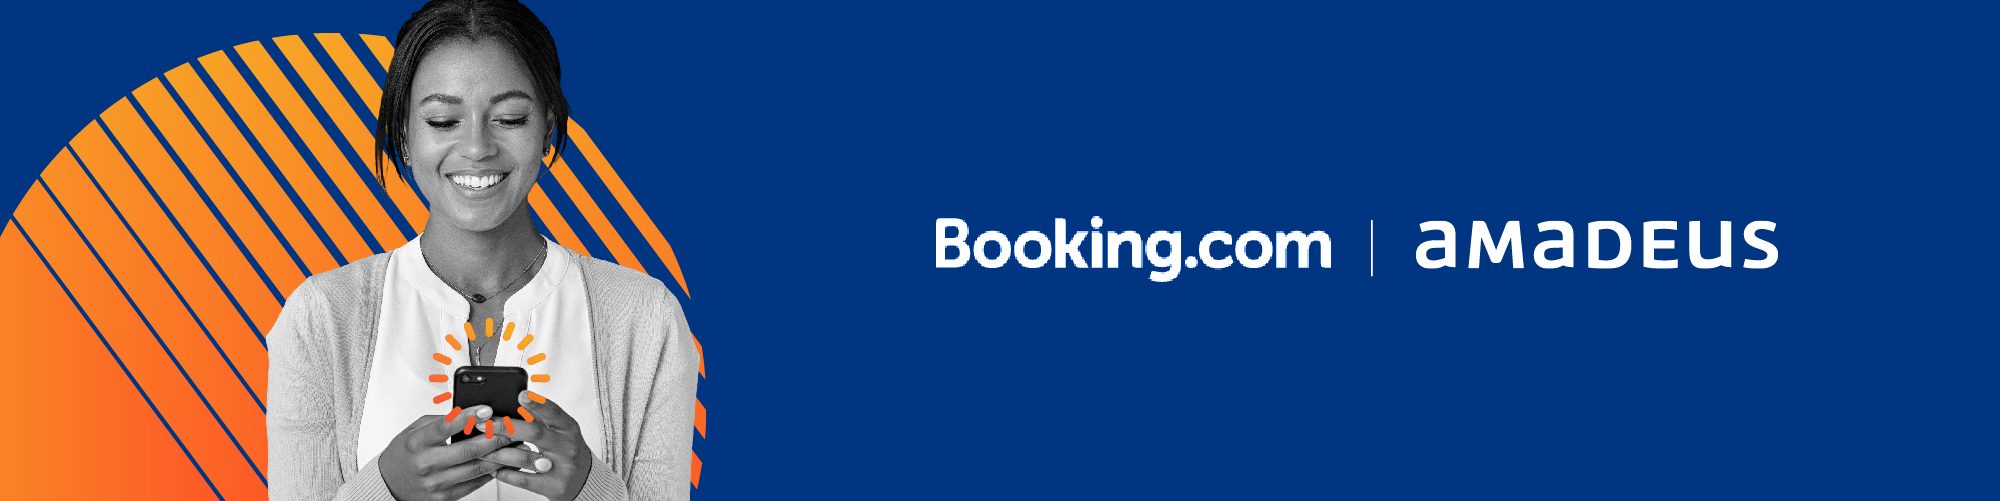 Booking.com and Amadeus Partnership is Set to Streamline the Payment Process Between Travel Agencies and Accommodation Providers